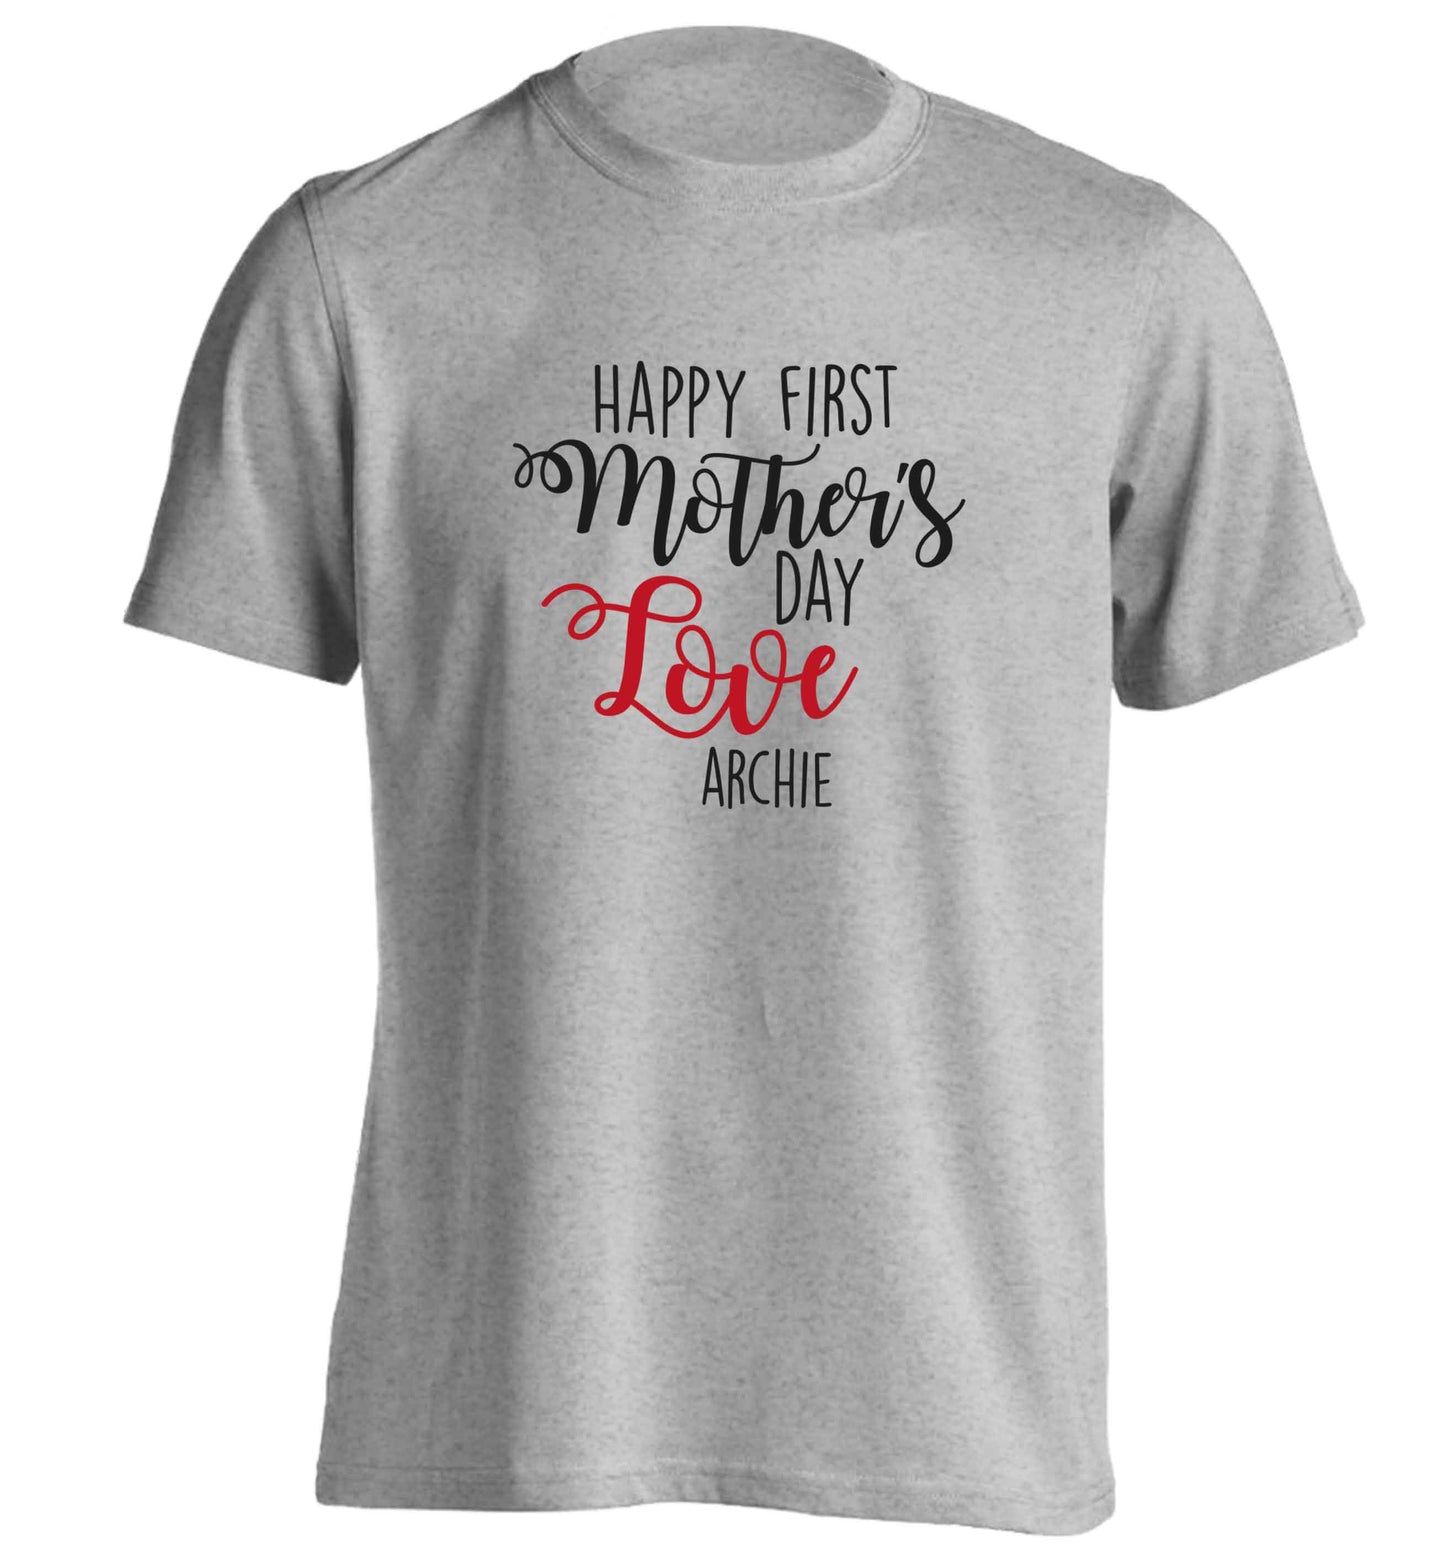 Mummy's first mother's day! adults unisex grey Tshirt 2XL